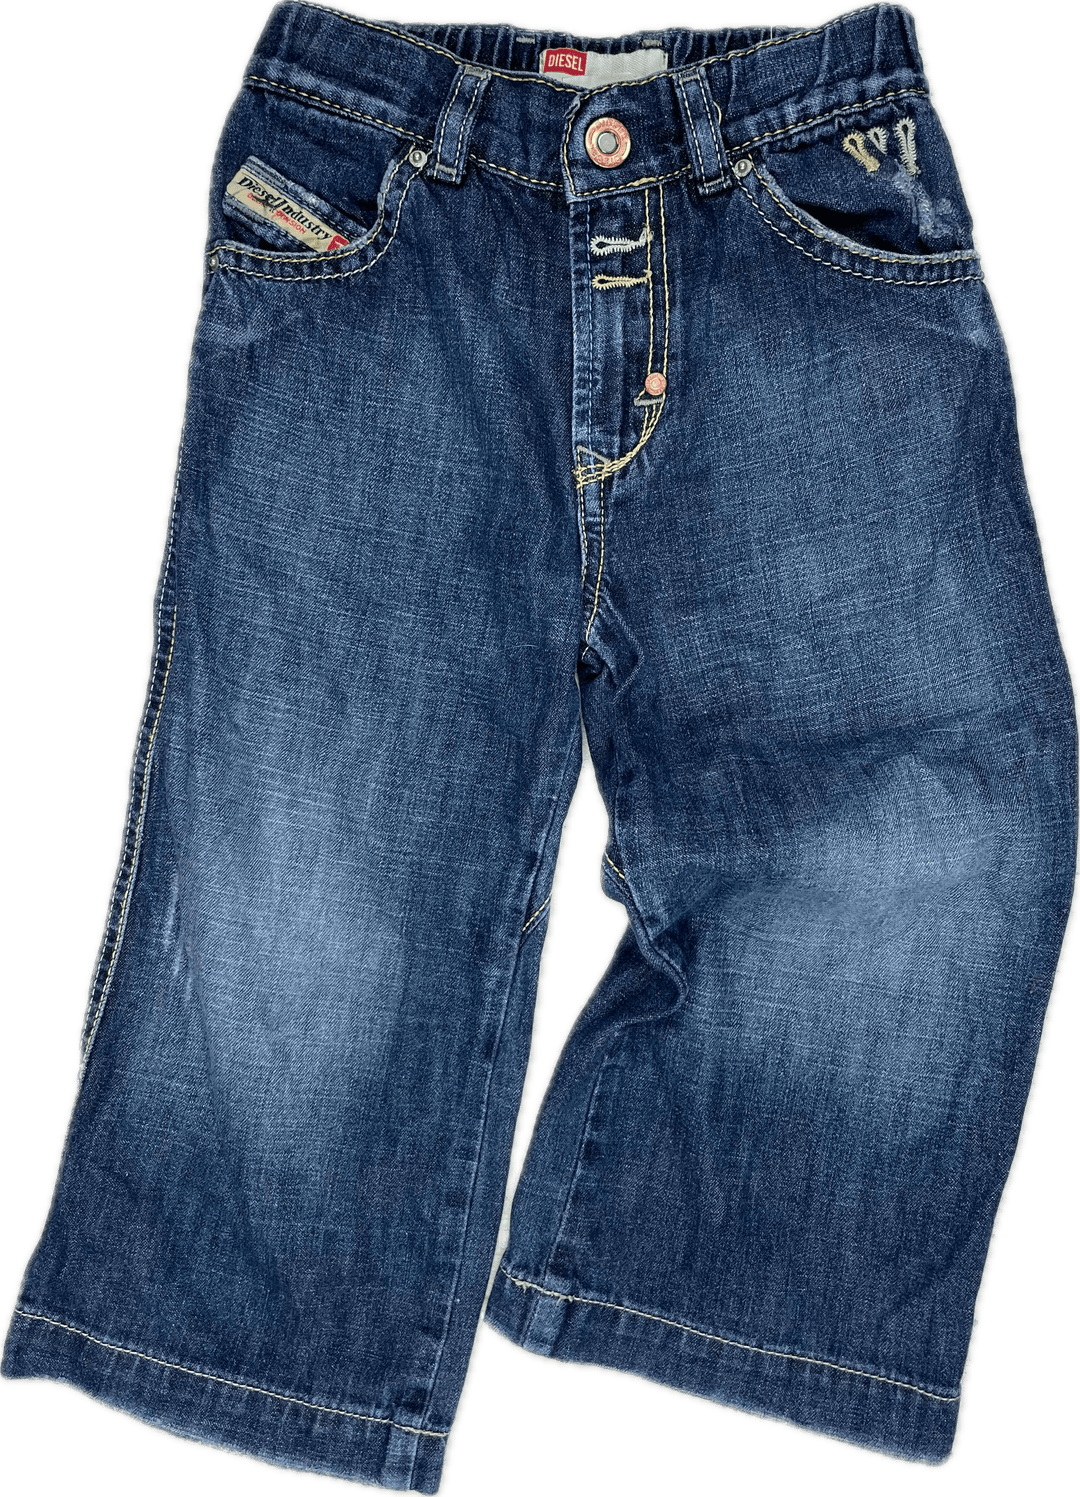 Diesel Toddler Straight Leg Relaxed Fit Jeans - Size 2Y - Jean Pool